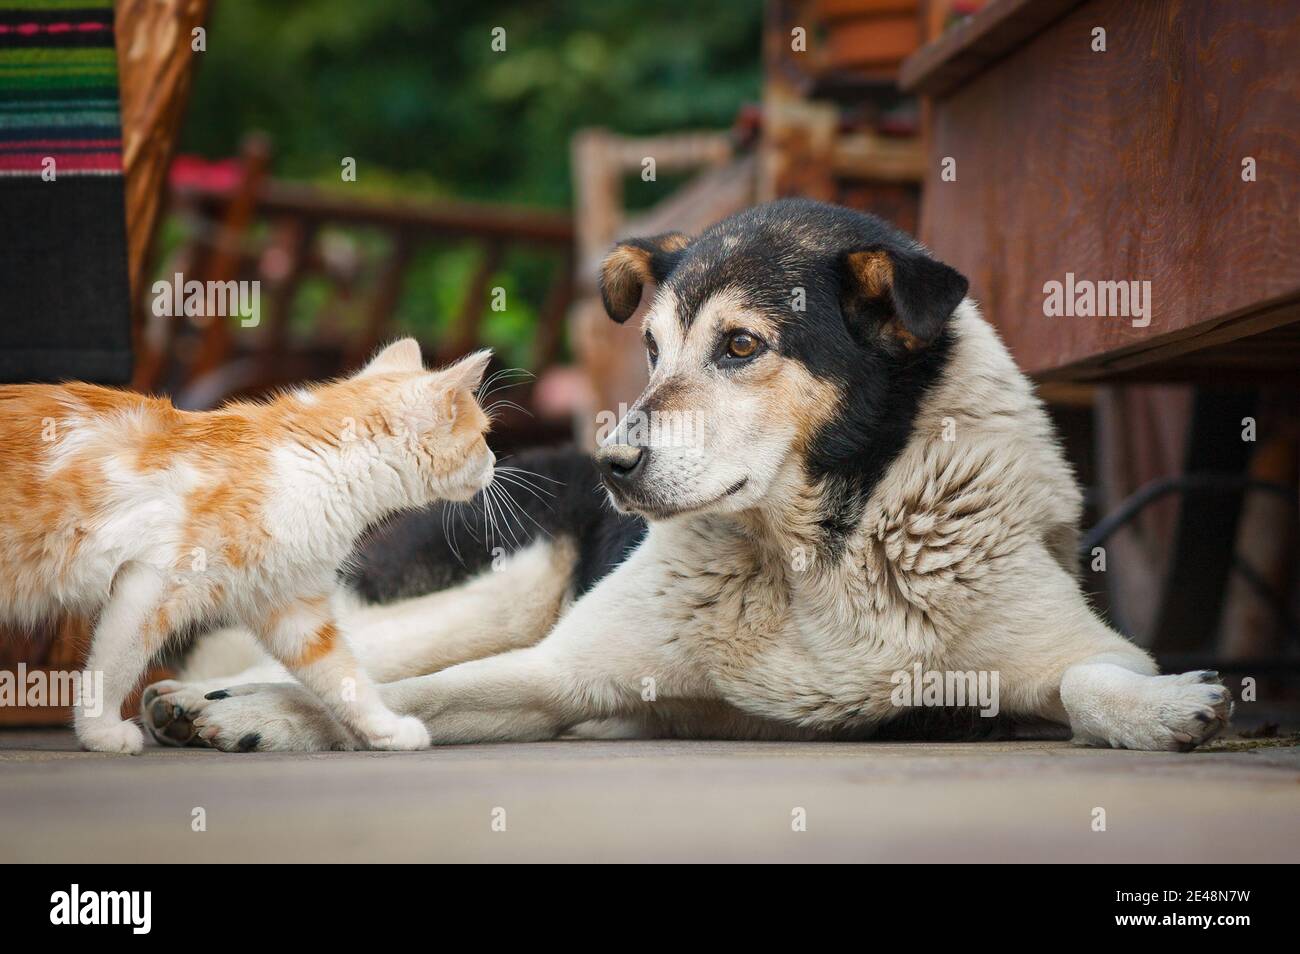 Funny friendship cat and dog. Postcard with pets Stock Photo